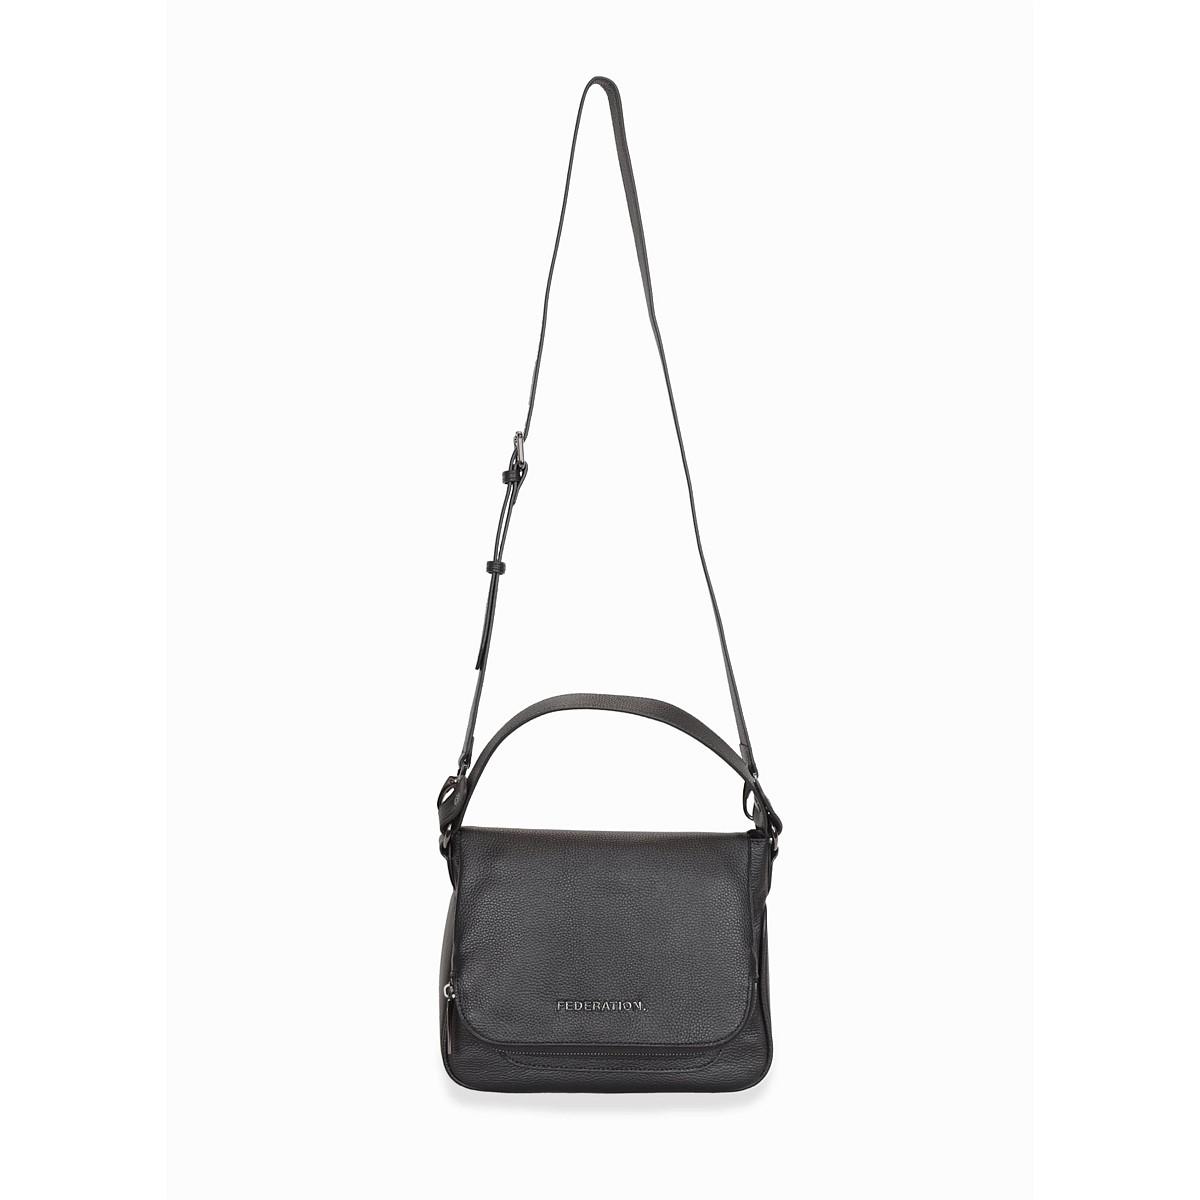 Women's Handbags Online | Air New Zealand's Airpoints™ Store